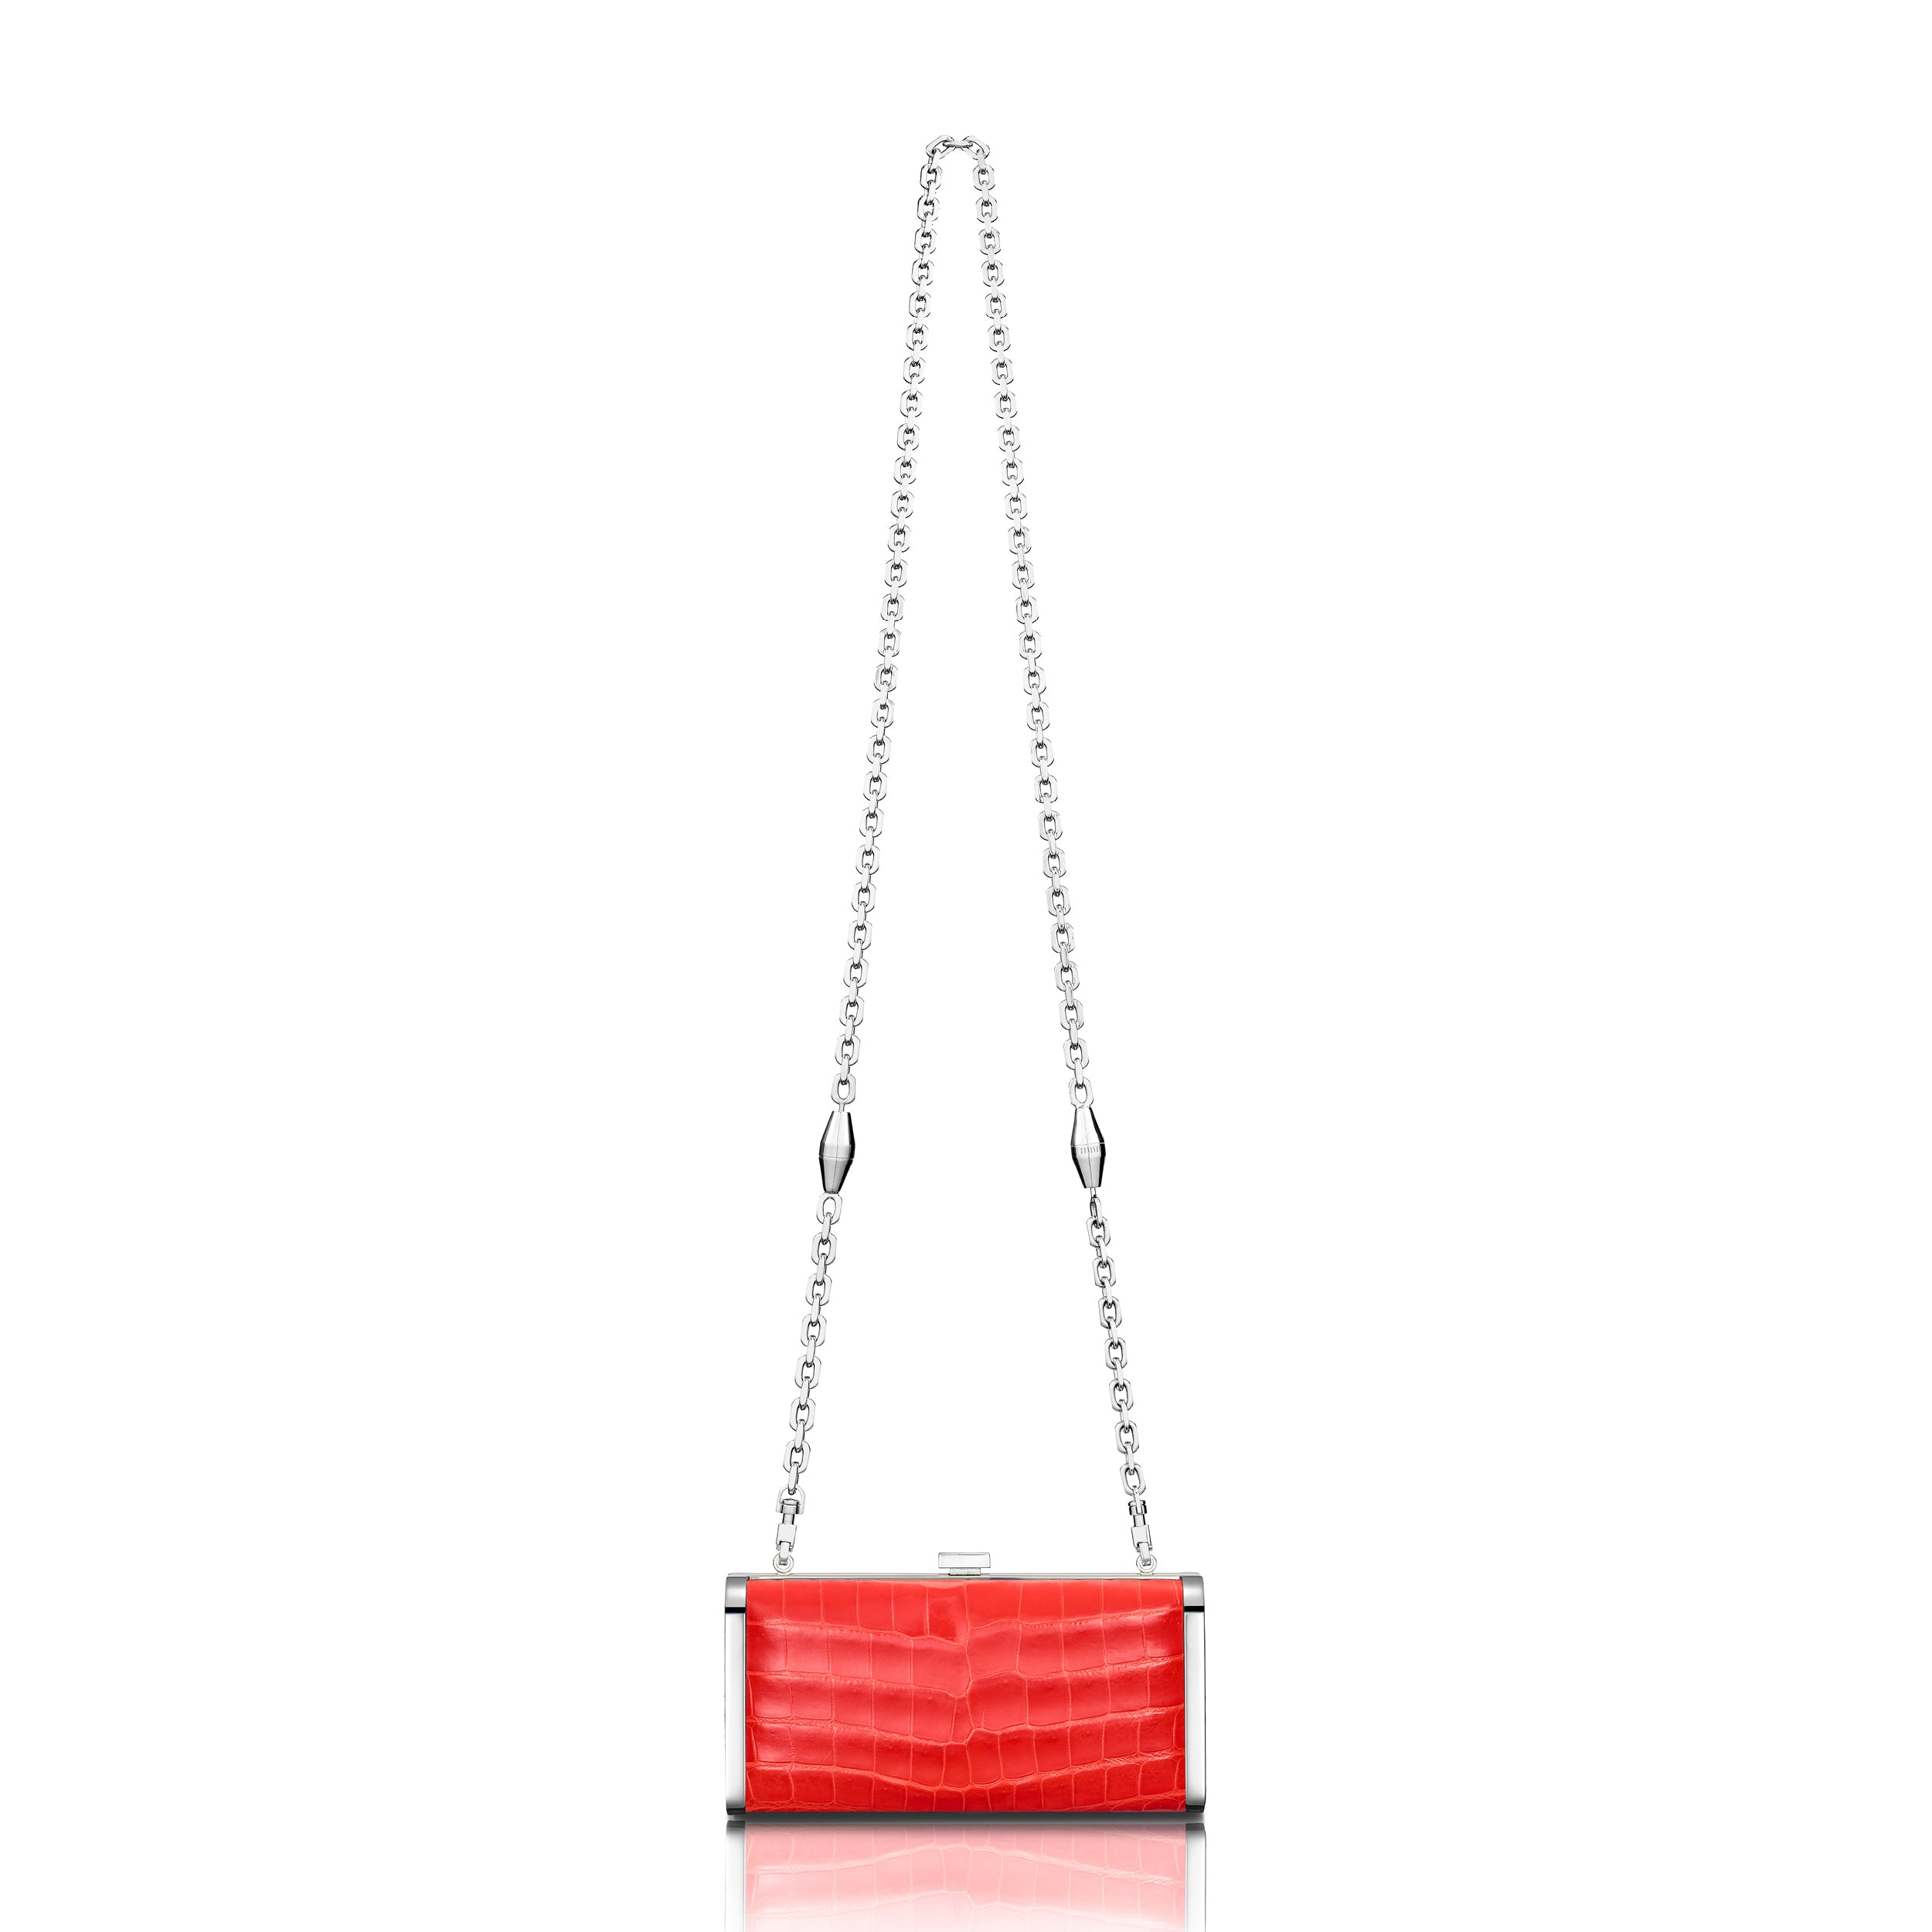 STALVEY Square Clutch in Neon Orange Alligator with Palladium Hardware Back View with Chain